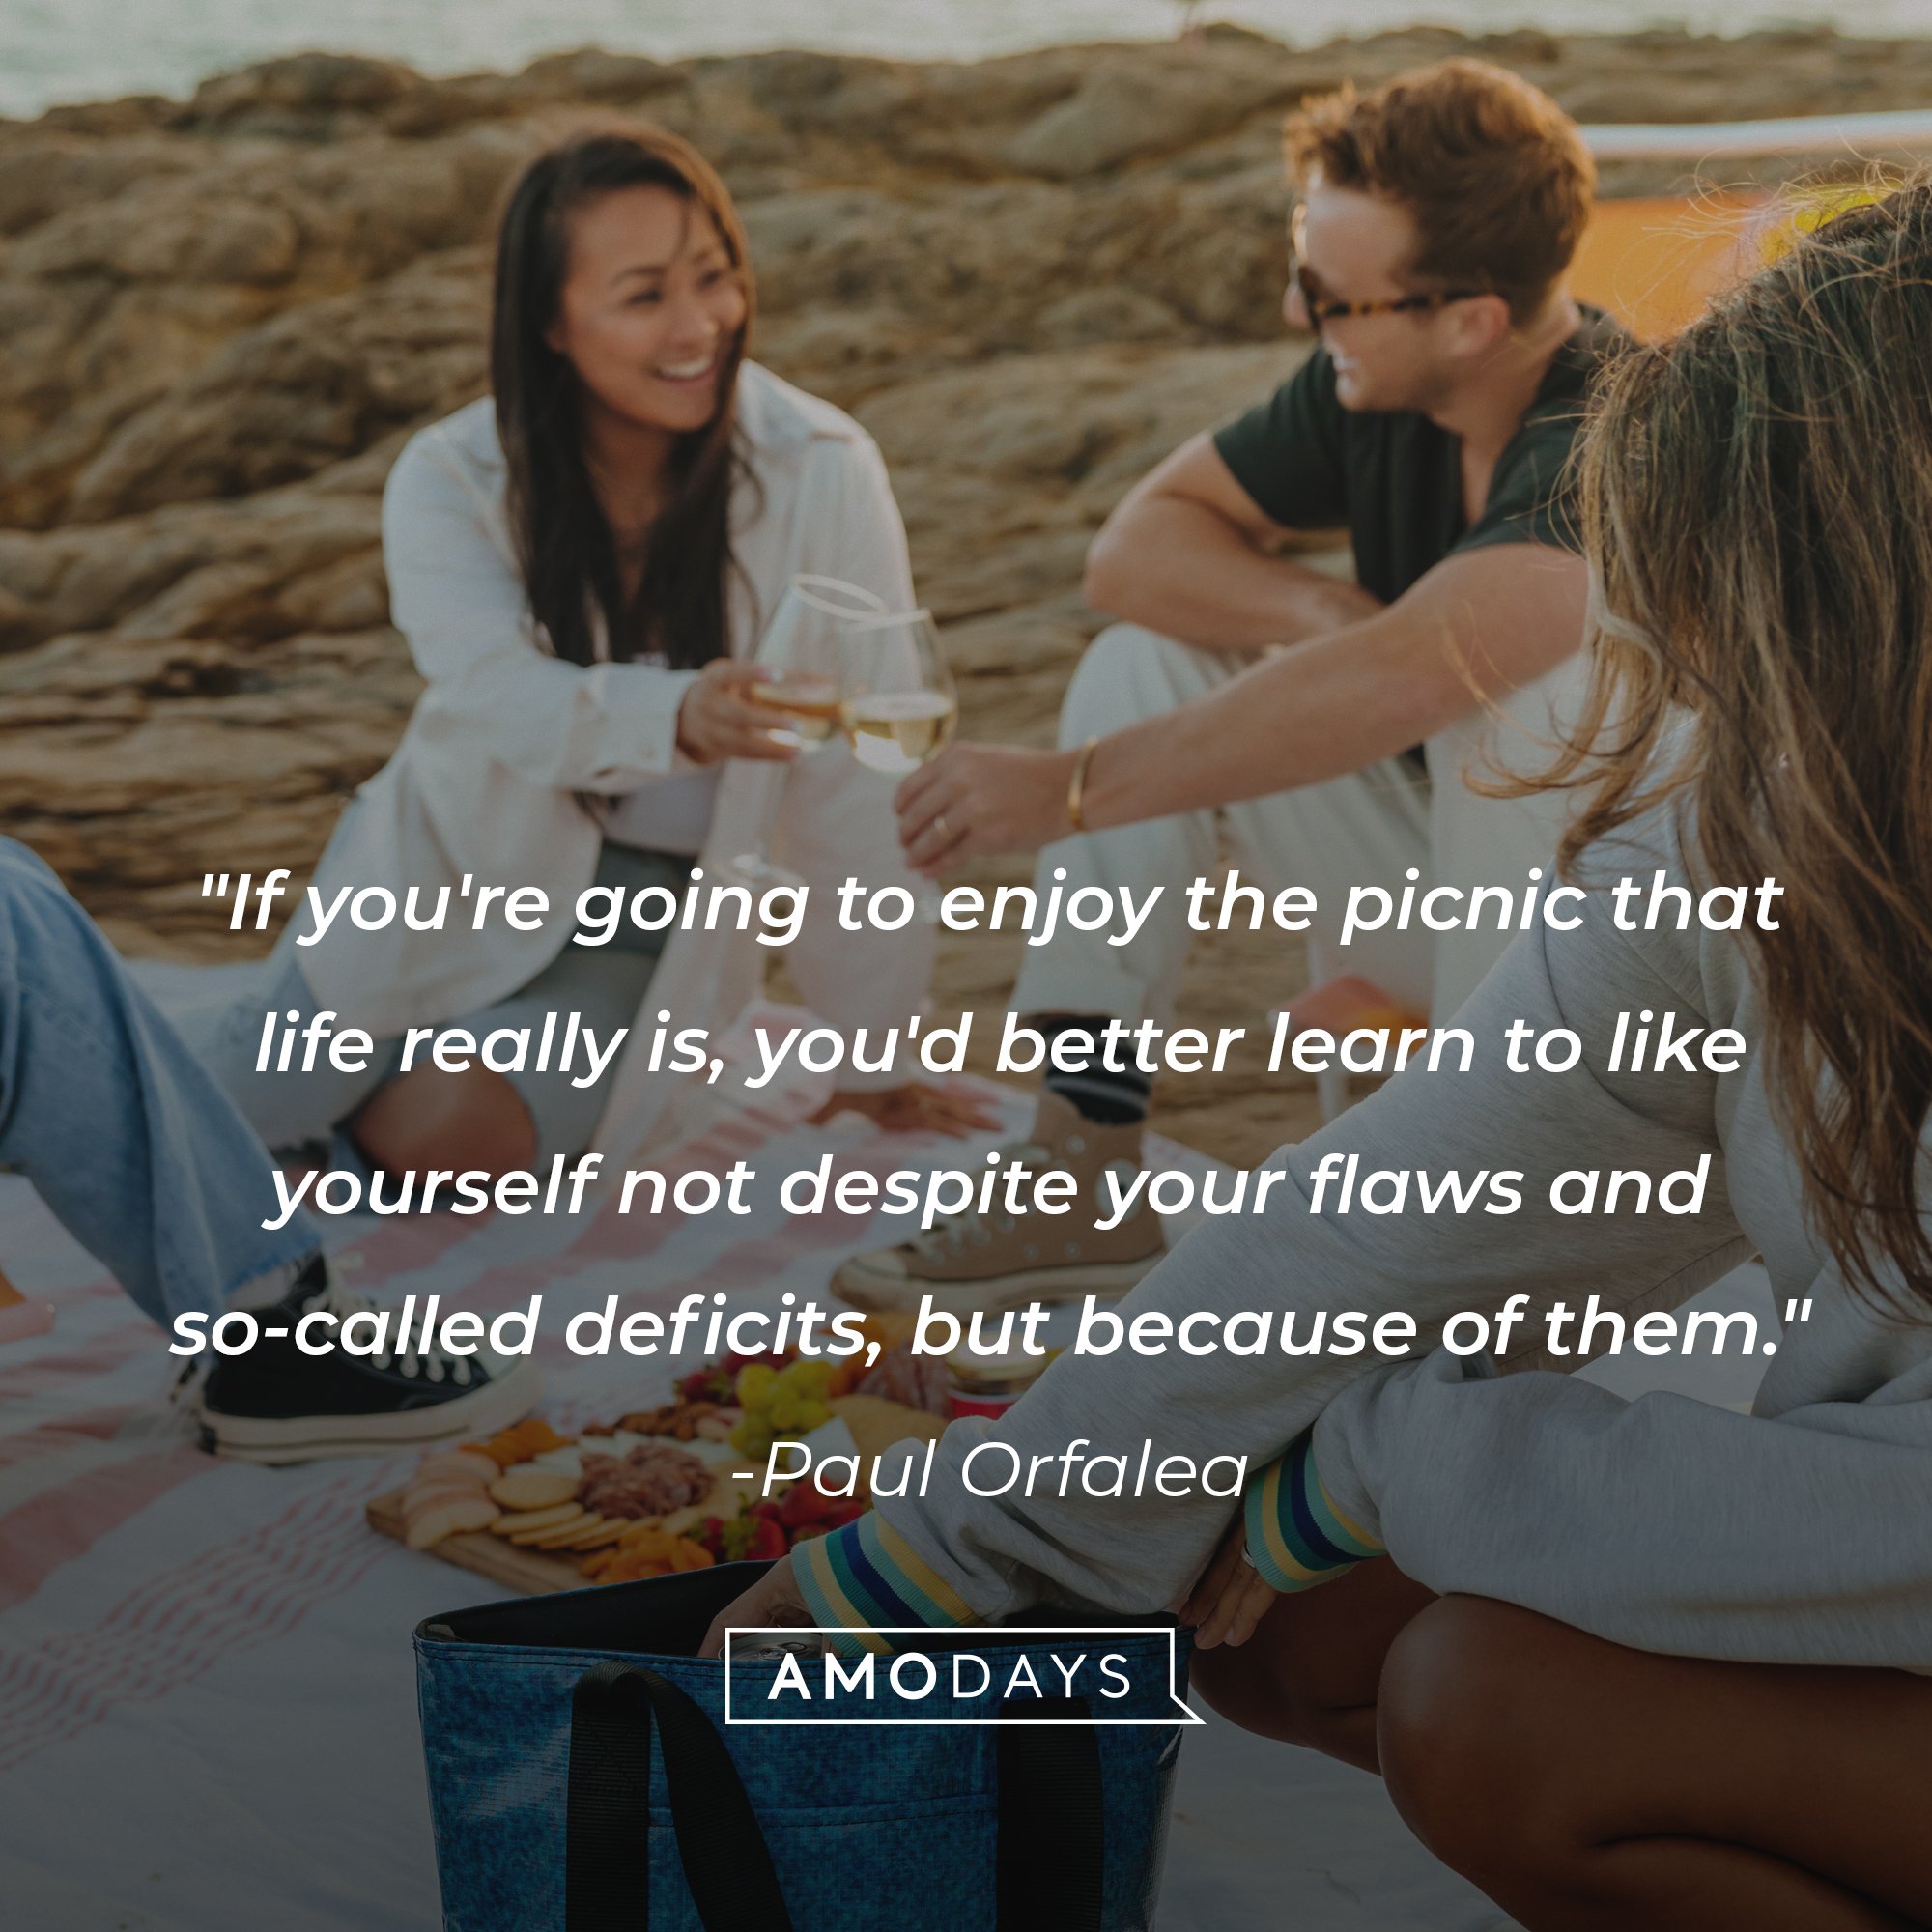 Paul Orfalea's quote: "If you're going to enjoy the picnic that life really is, you'd better learn to like yourself not despite your flaws and so-called deficits, but because of them." | Image: AmoDays